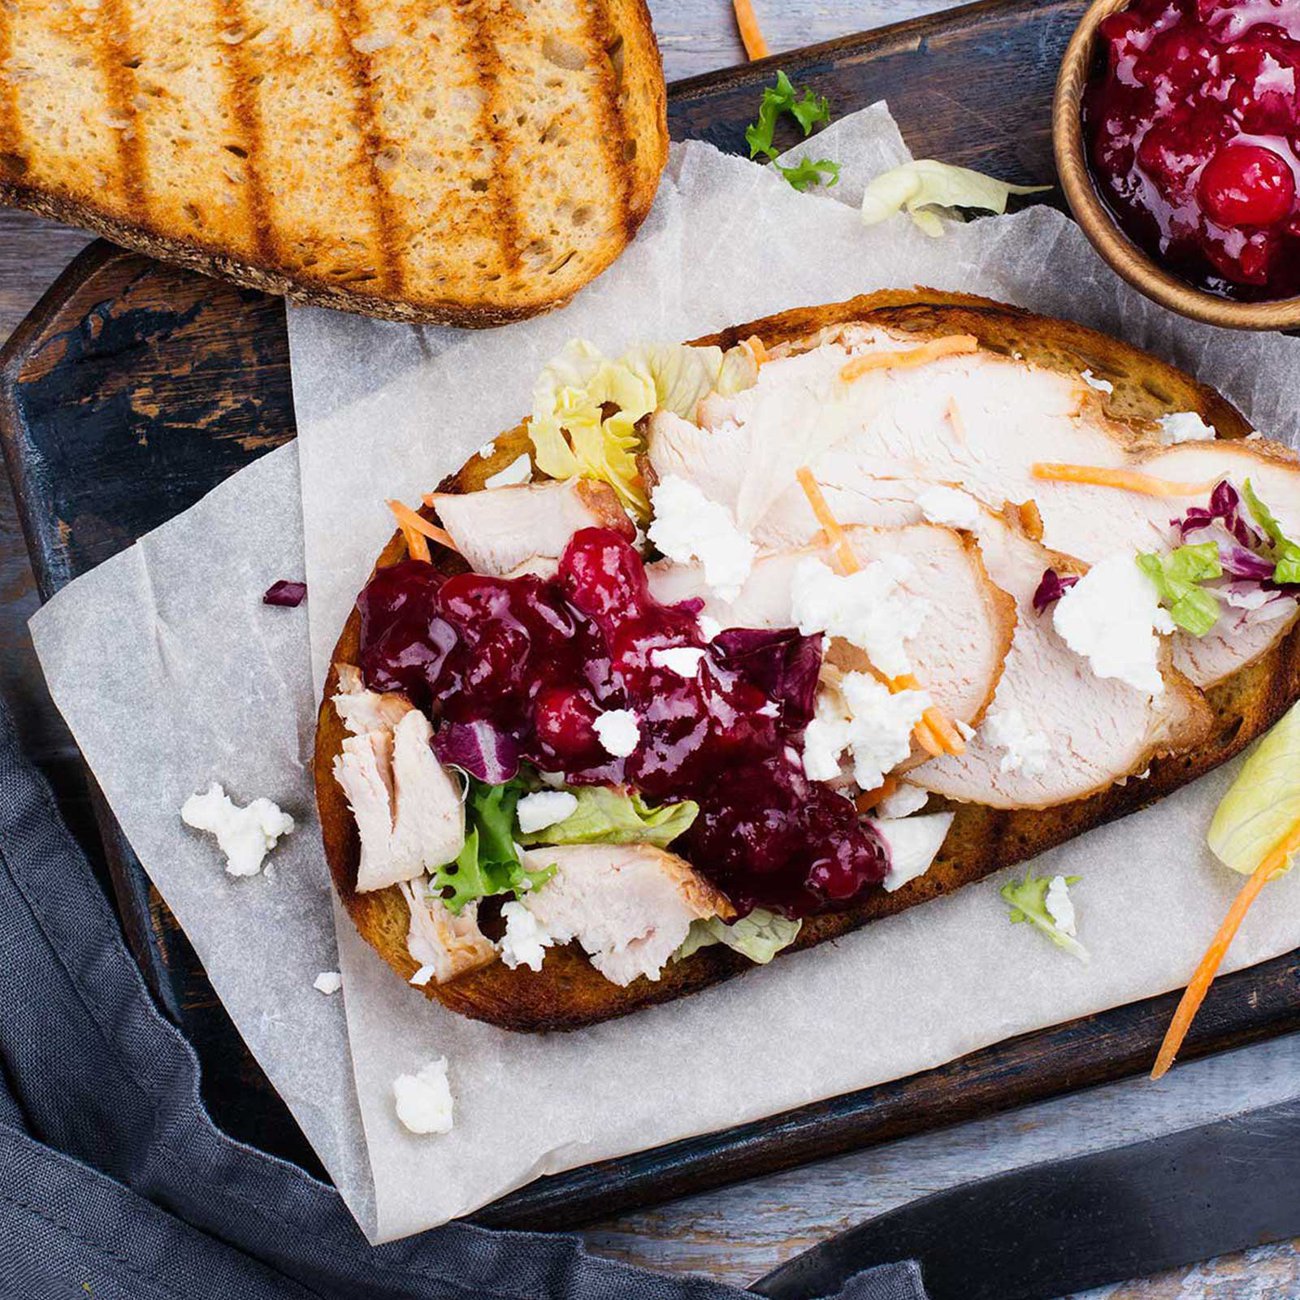 Turkey & Cranberry is a popular combination